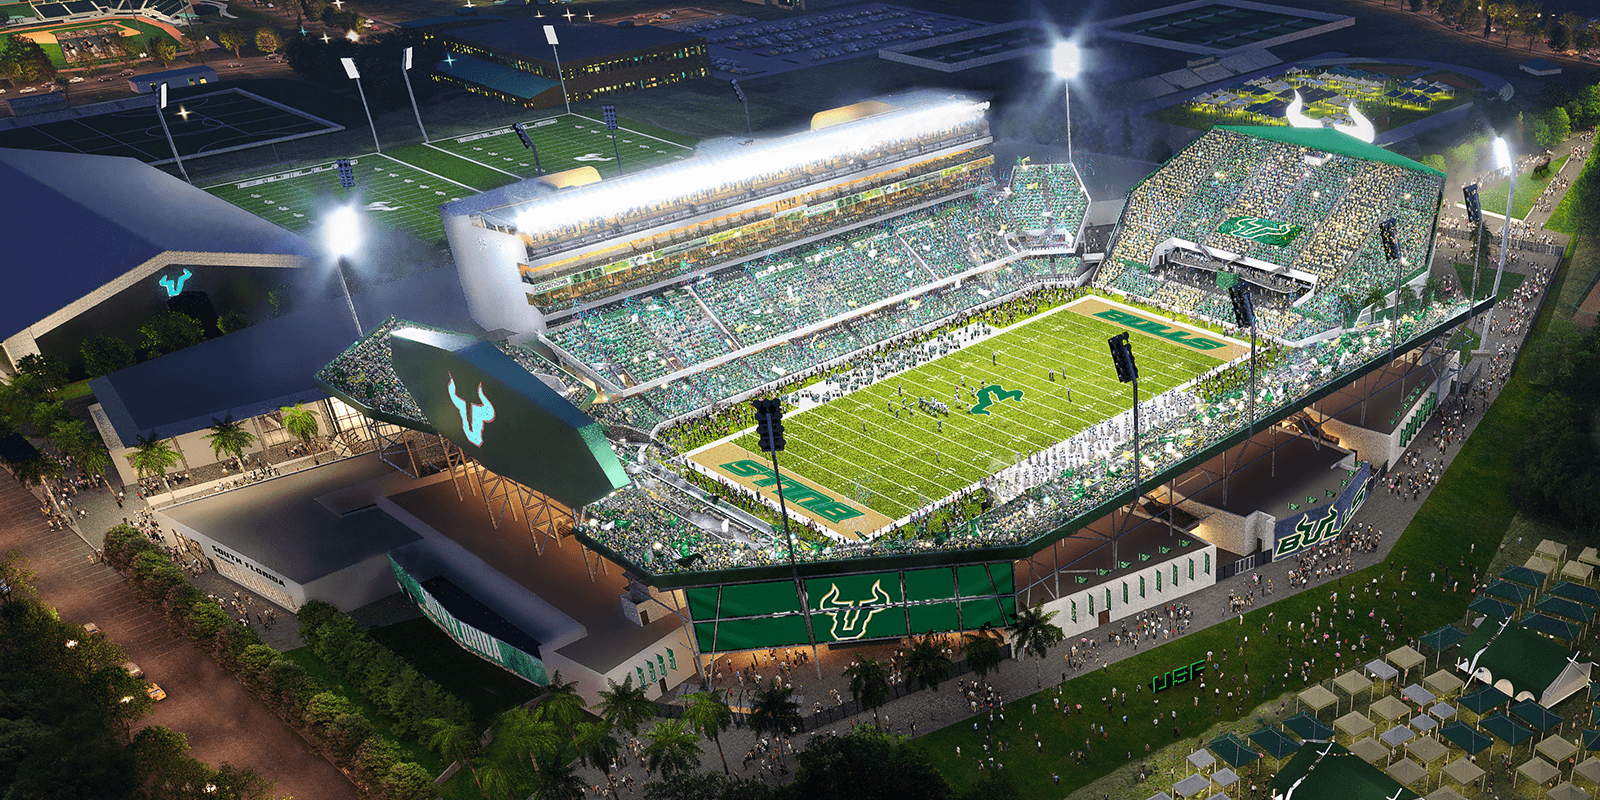 USF releases first renderings of new on-campus stadium, announces $6 million gift